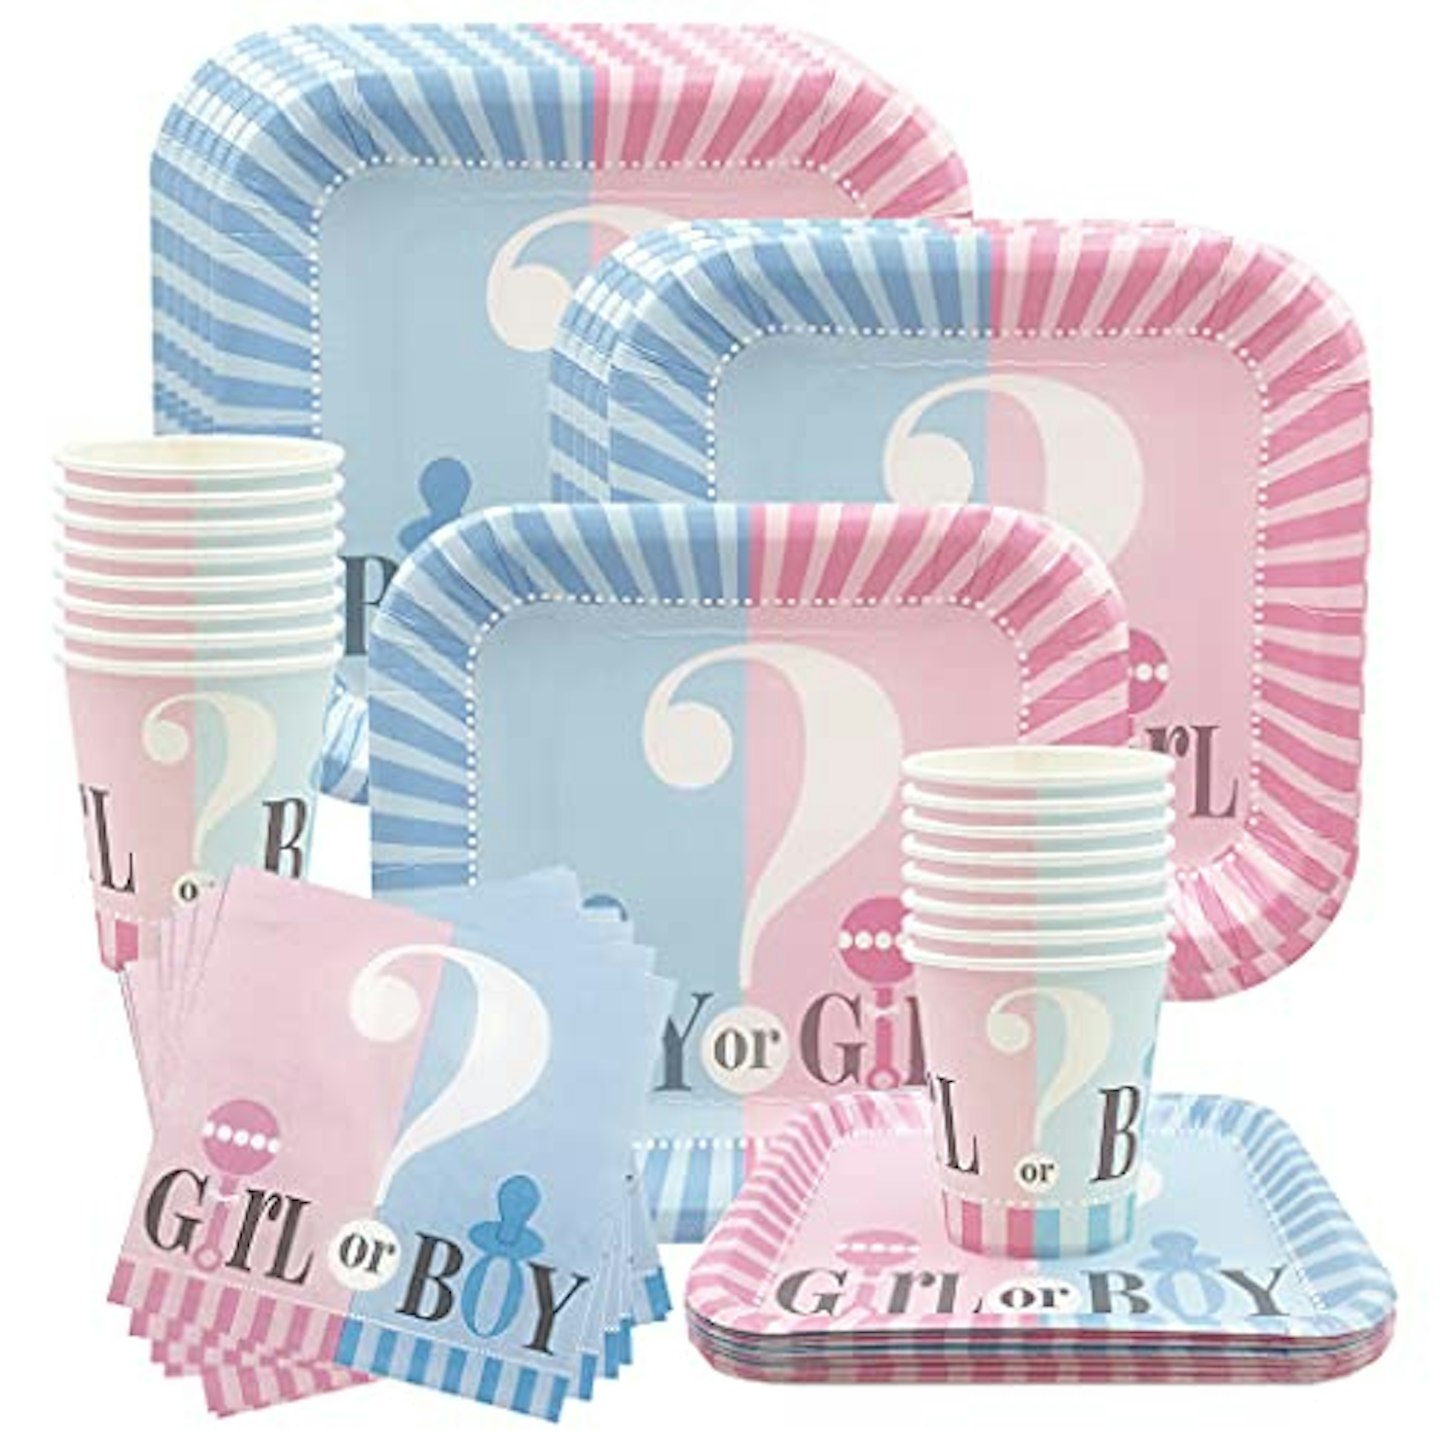 Gender party plates and tableware